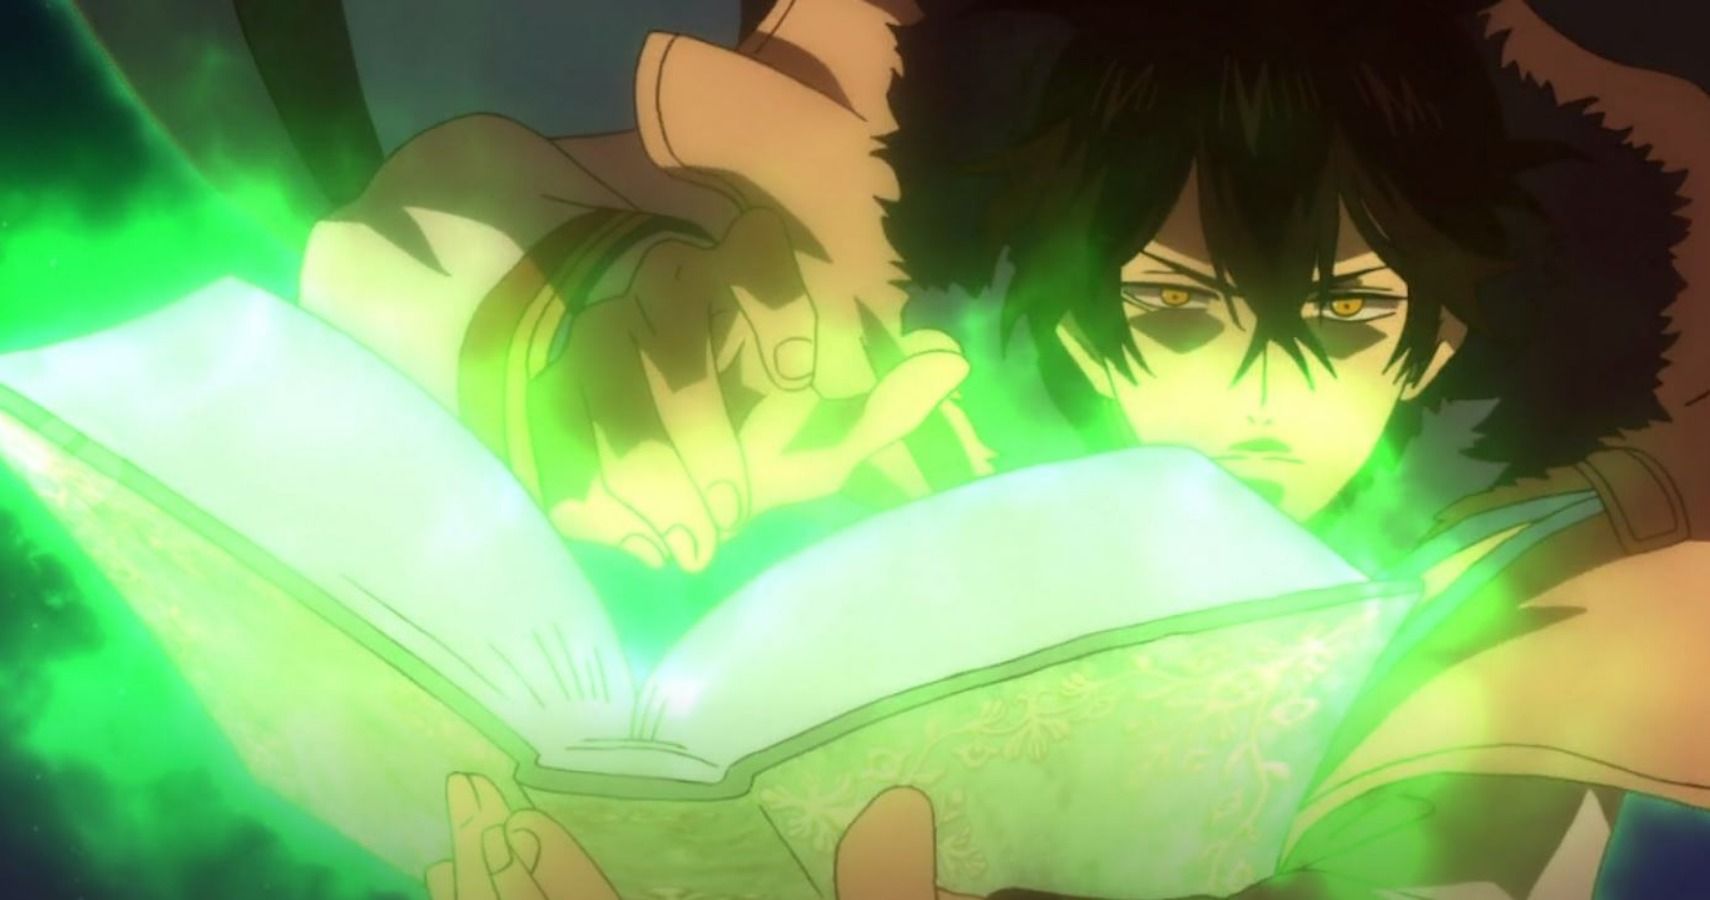 Black Clover: Yuno's 10 Most Powerful Magic Techniques, Ranked